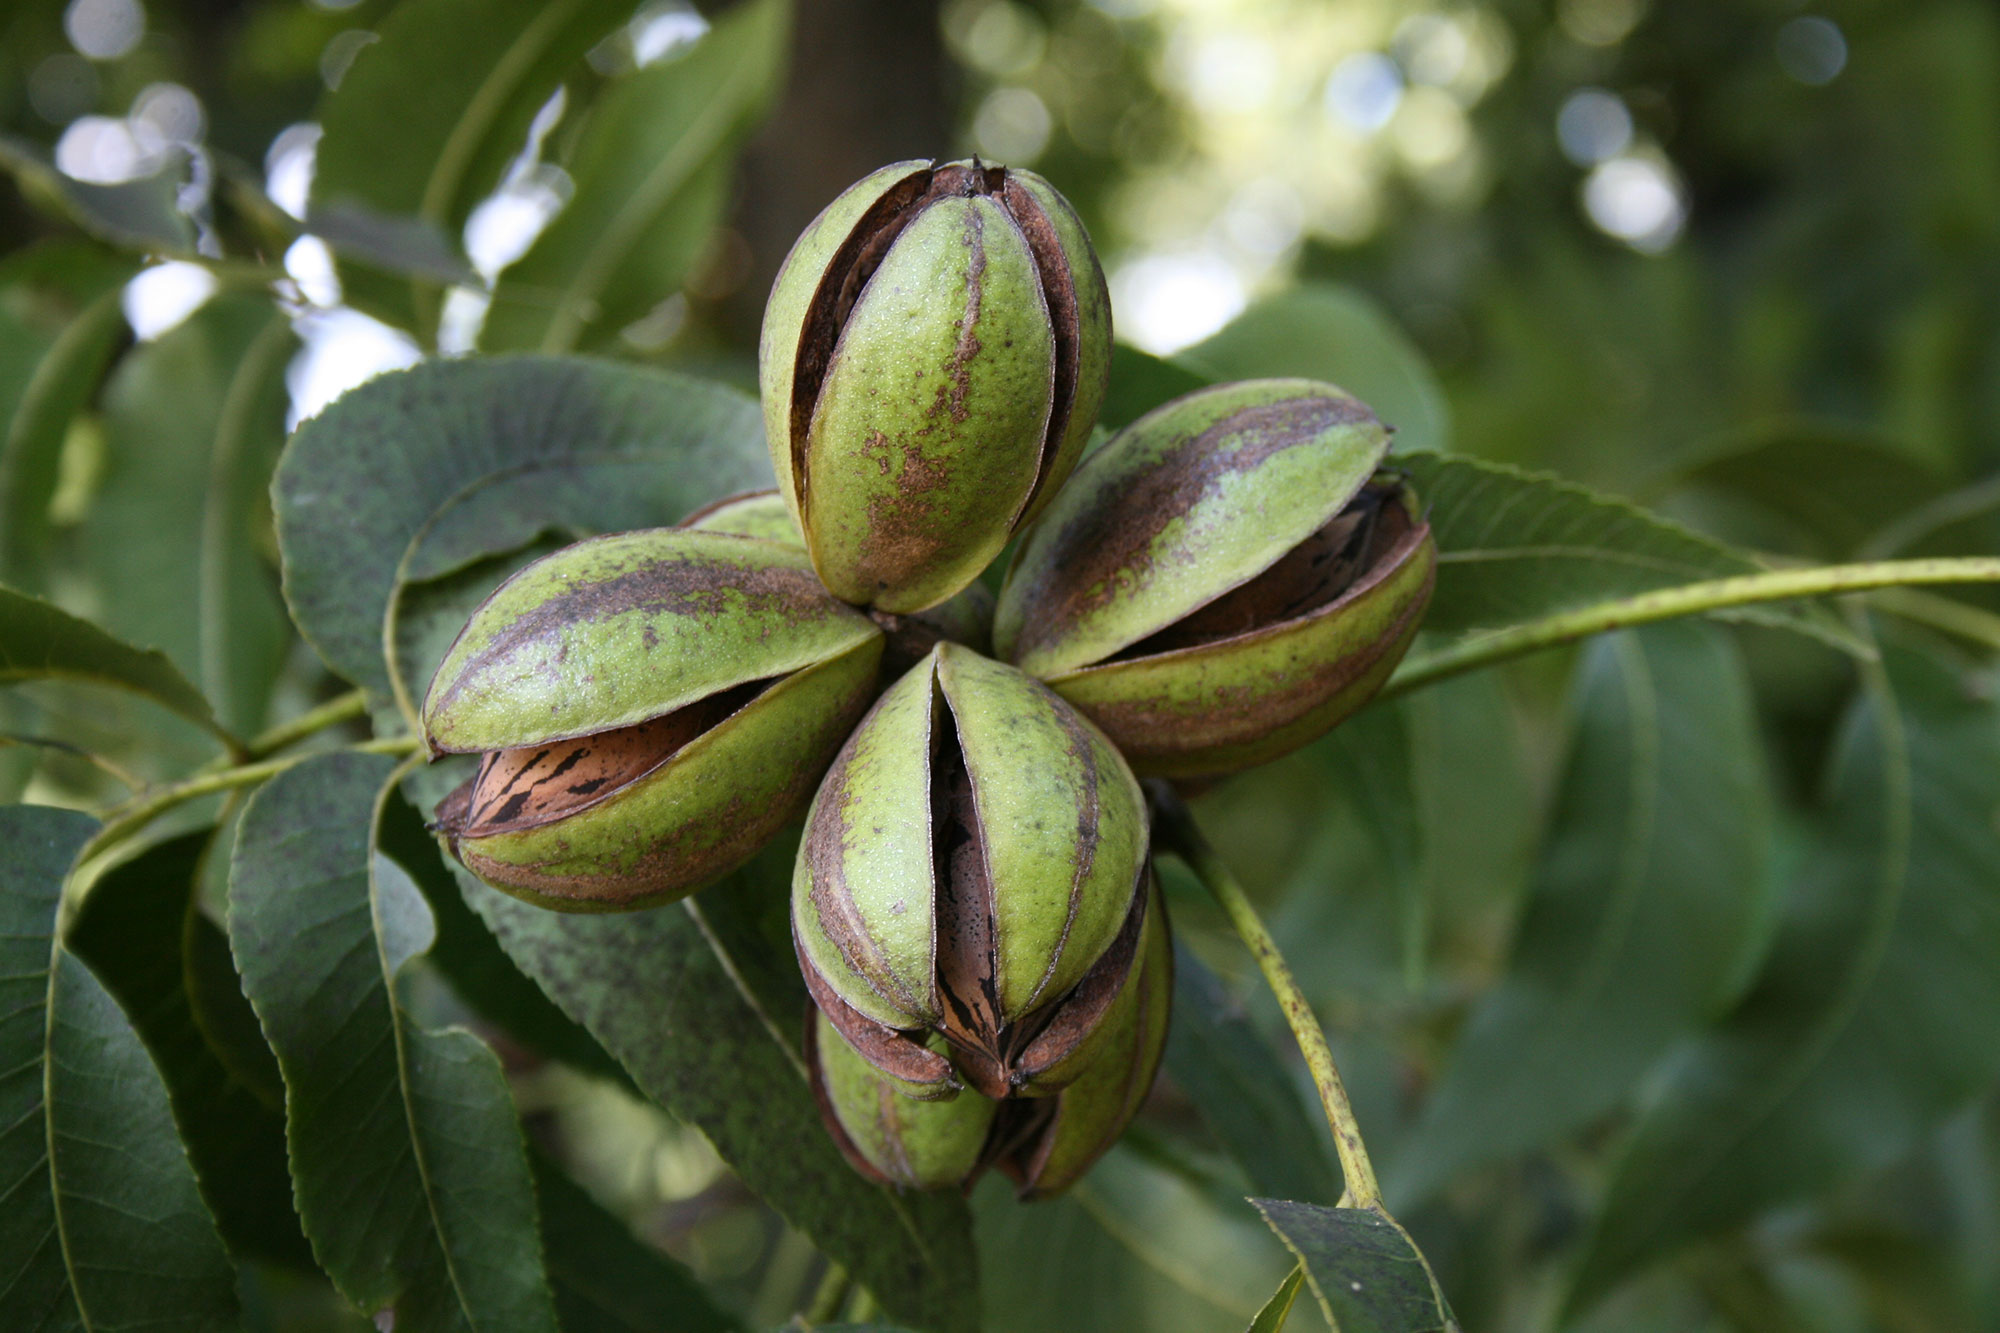 Noble to Host Upcoming Seminar on How to Start Growing Pecans, Addresses Challenges of Nut Production